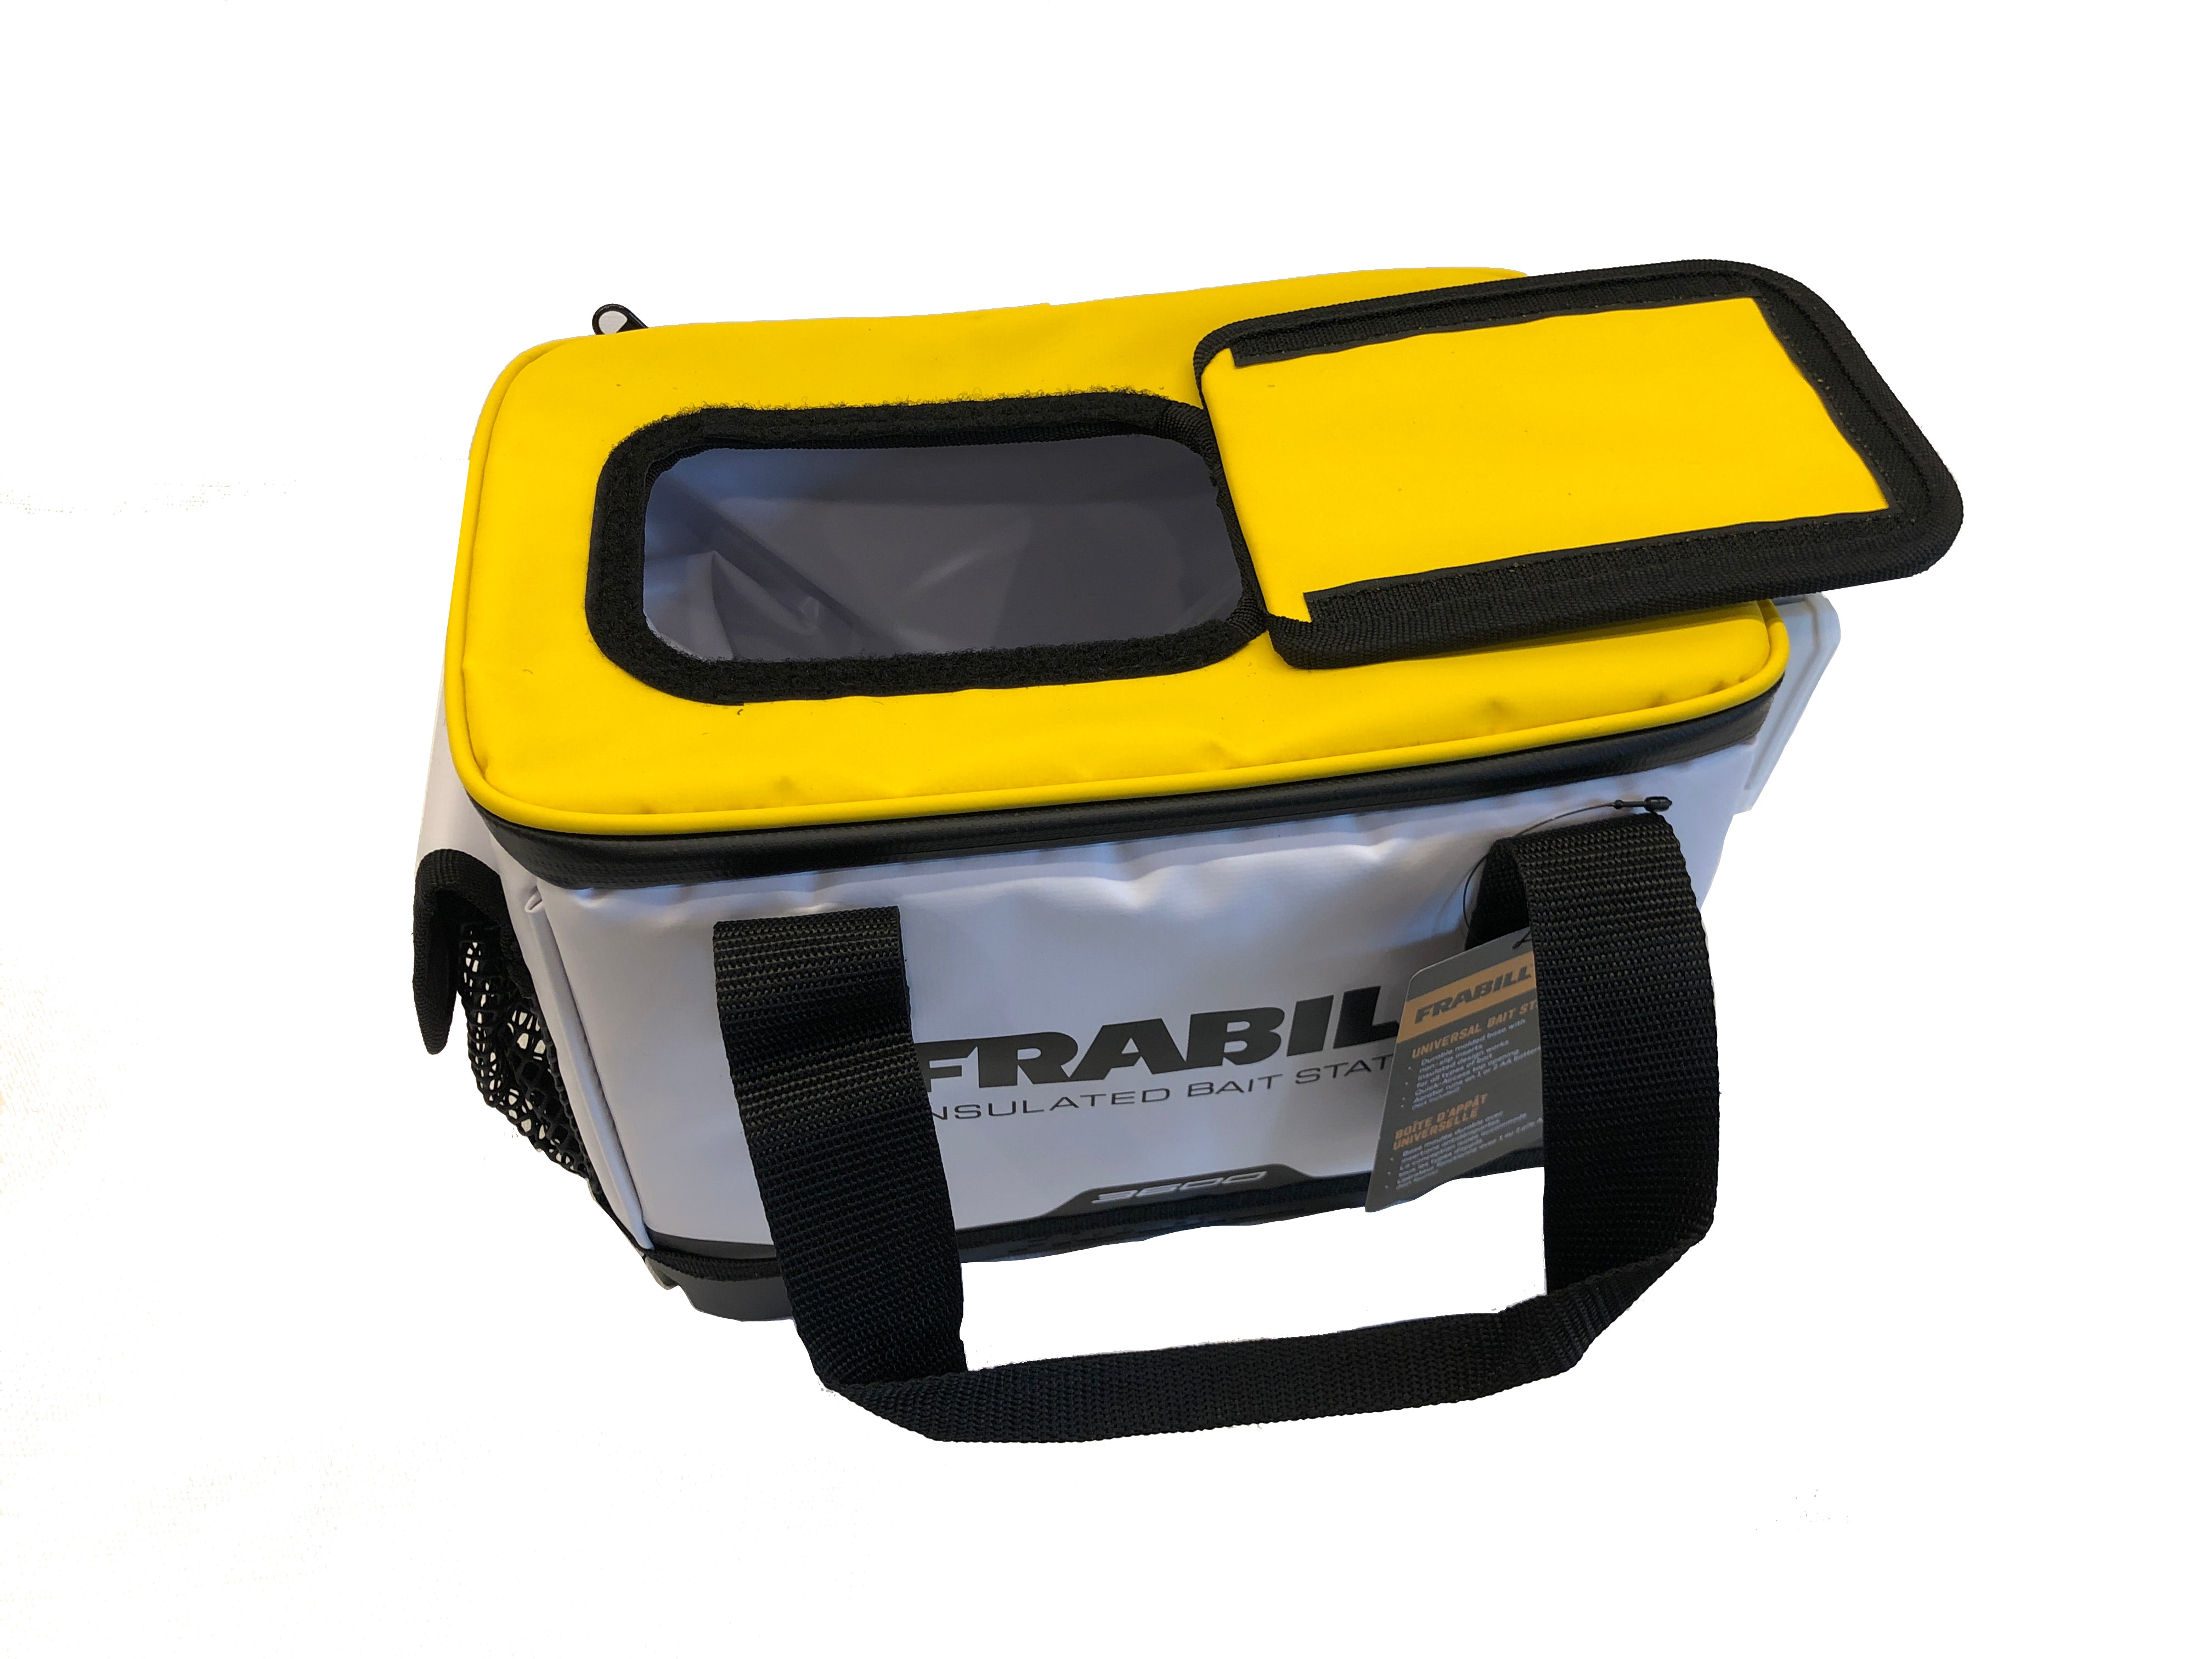 Frabill Universal Bait Station Review 